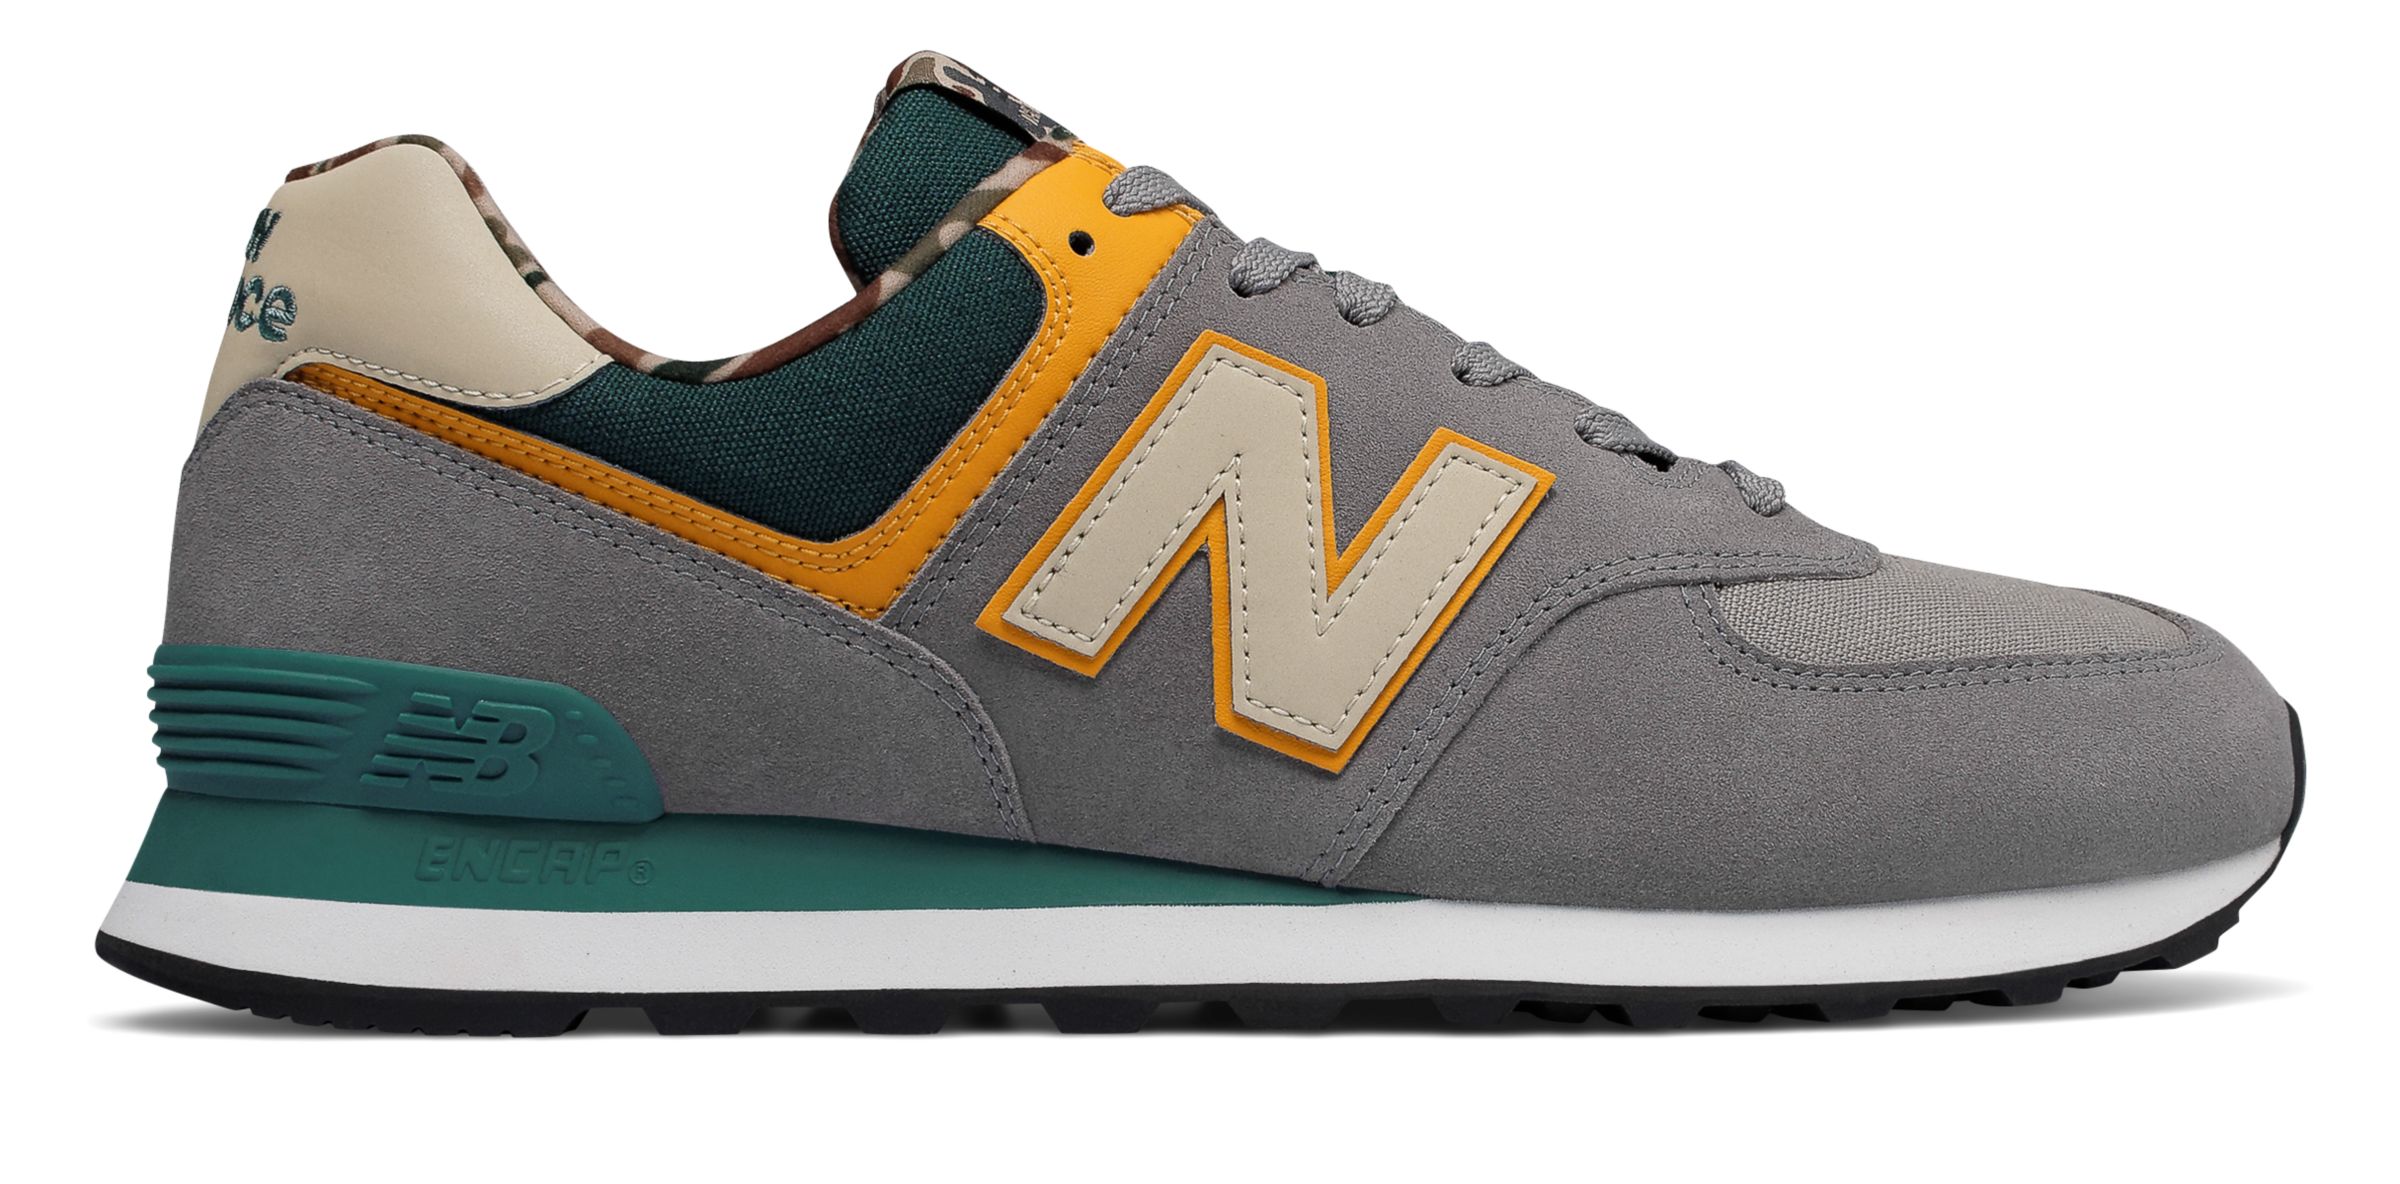 New Balance ML574-HV on Sale - Discounts Up to 53% Off on ML574HVE at Joe's  New Balance Outlet